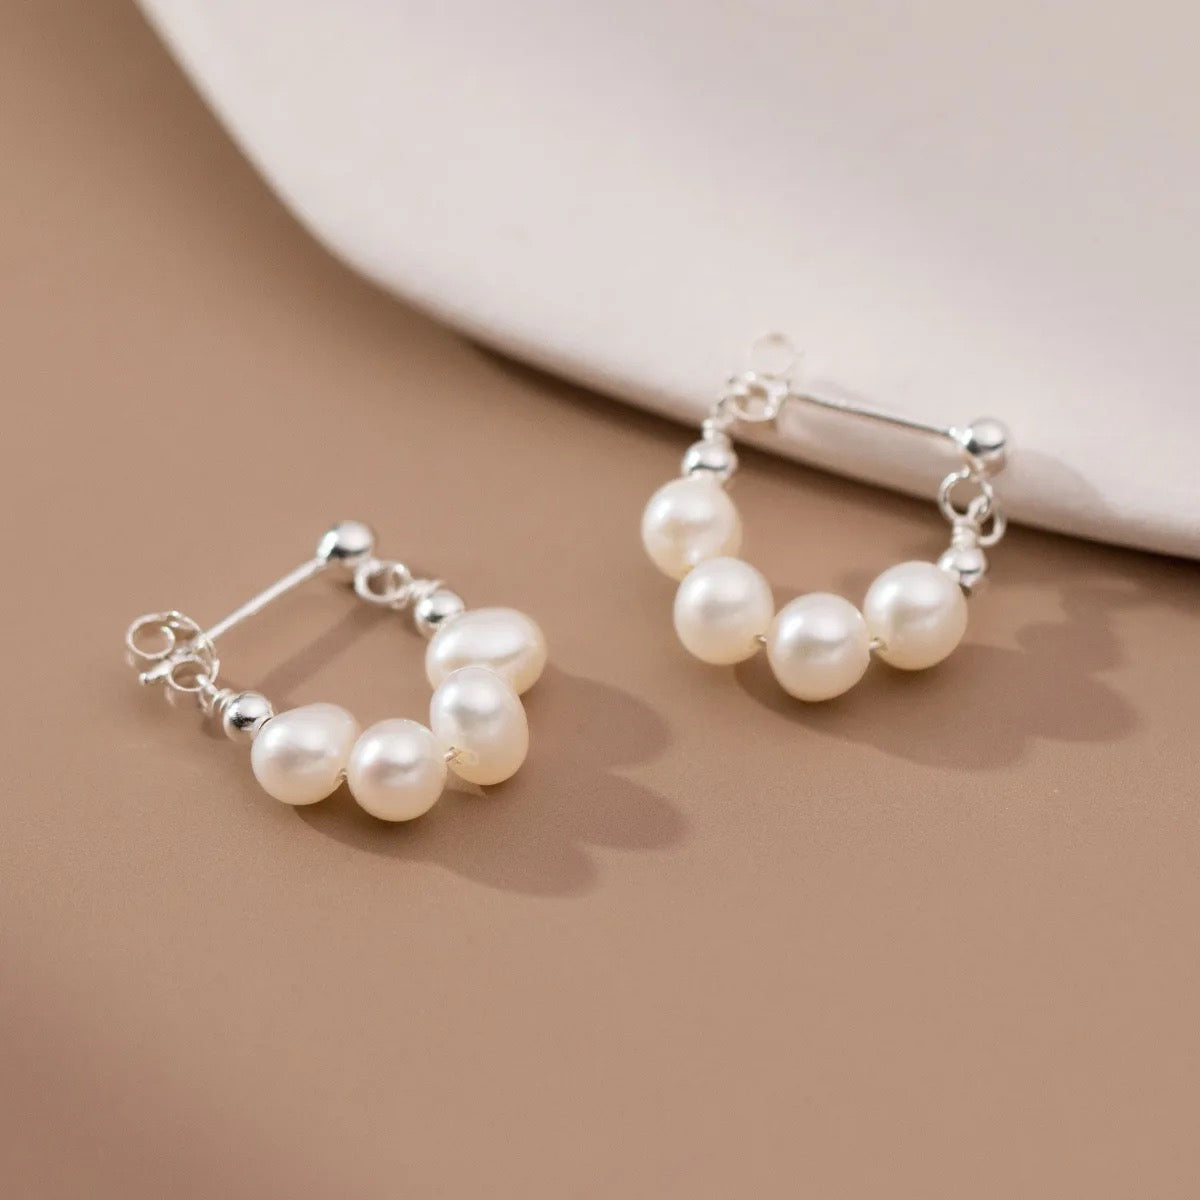 Monaco Charming Pearly Earrings (925S Gold/Silver)